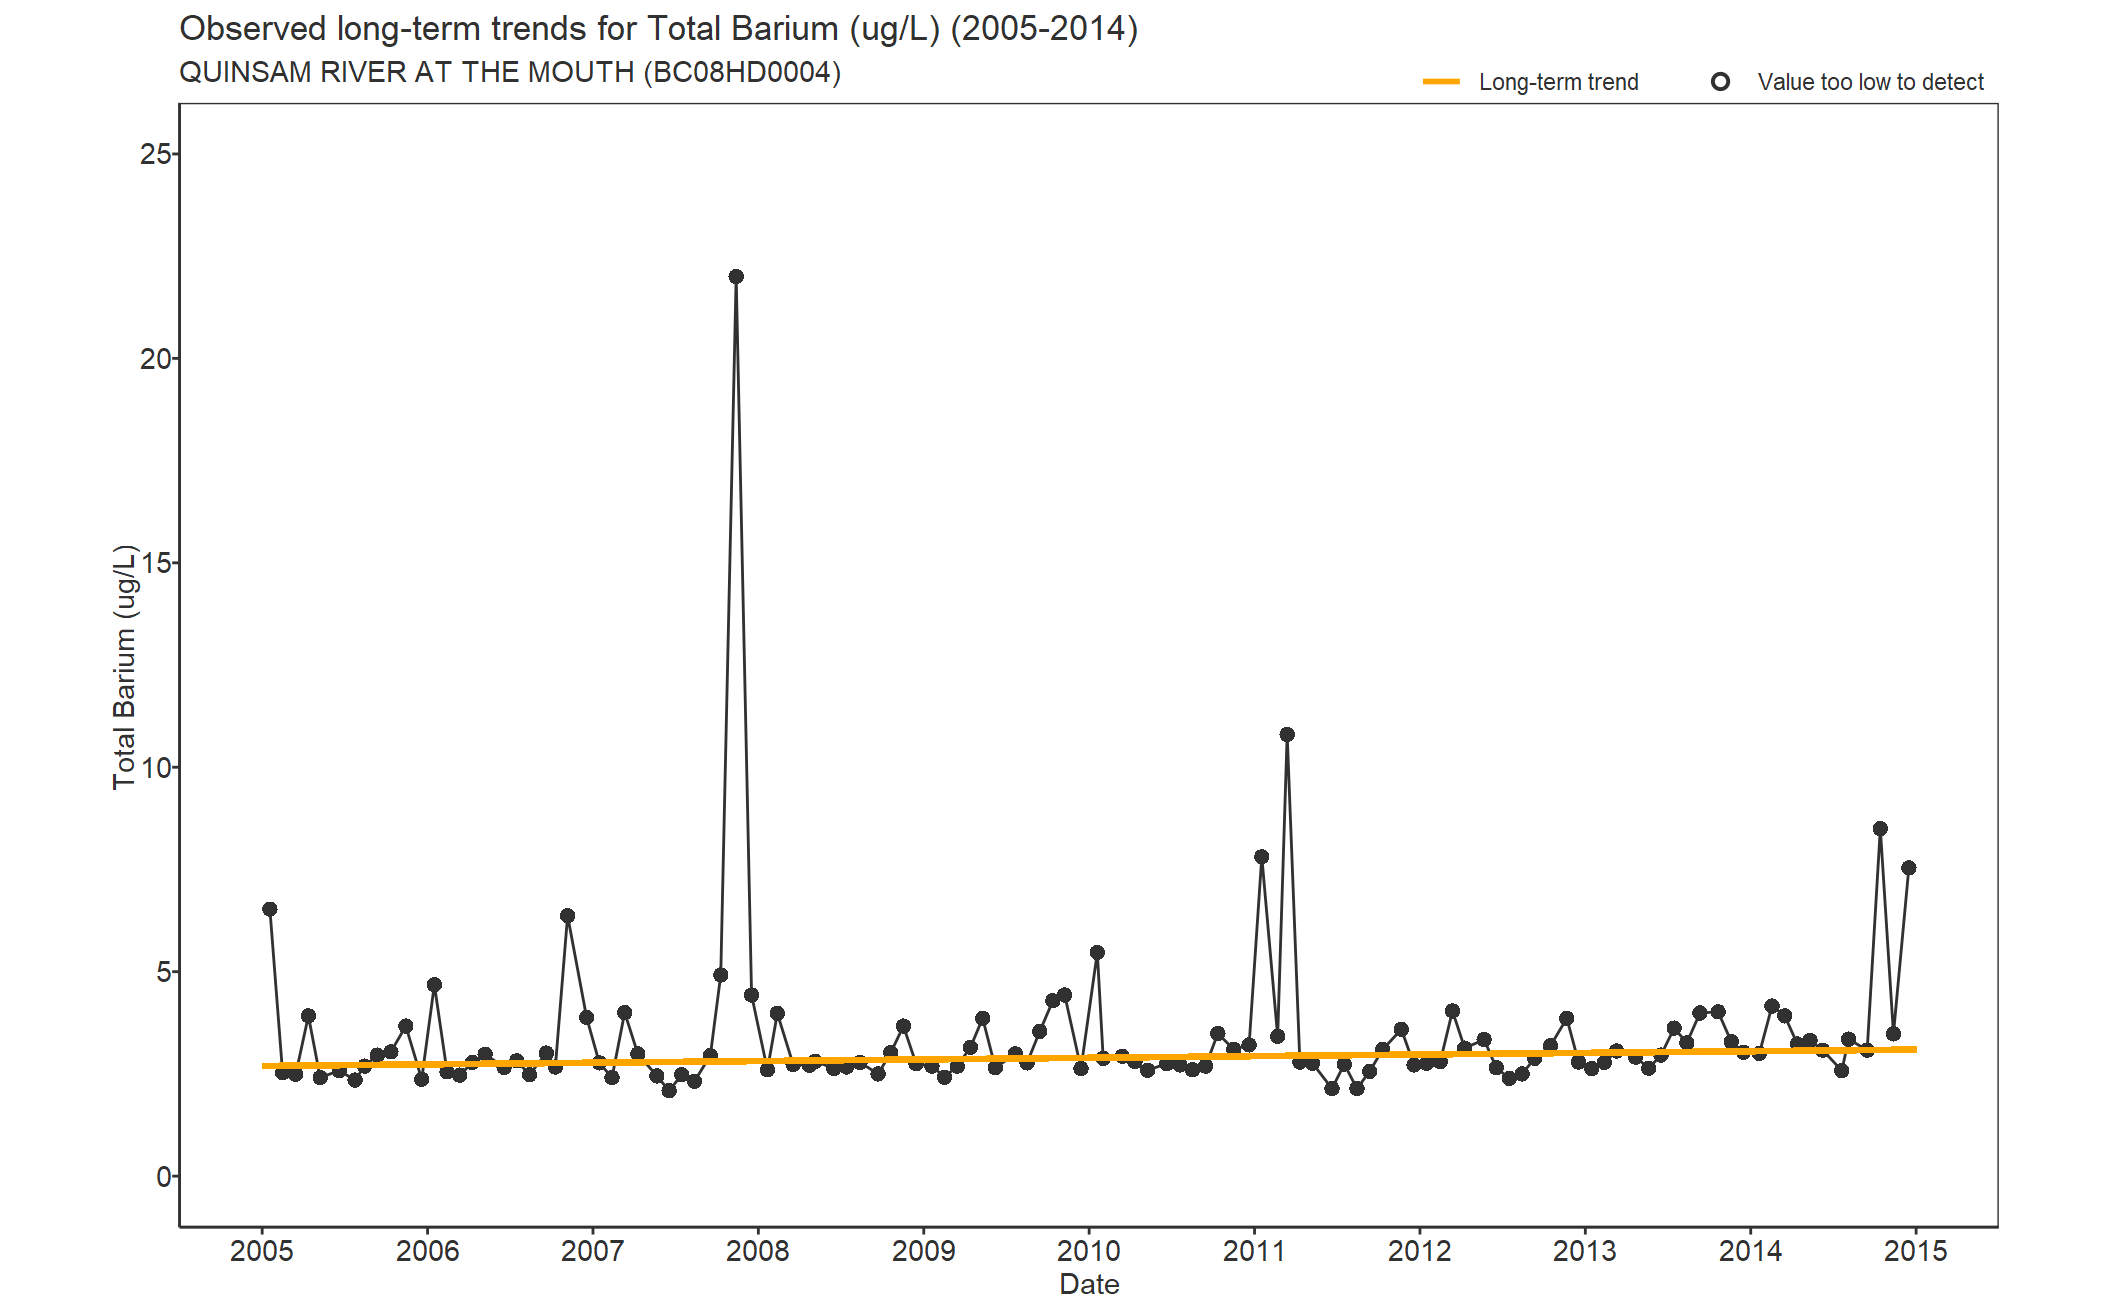 Observed long-term trends for Total Barium (2005-2014)